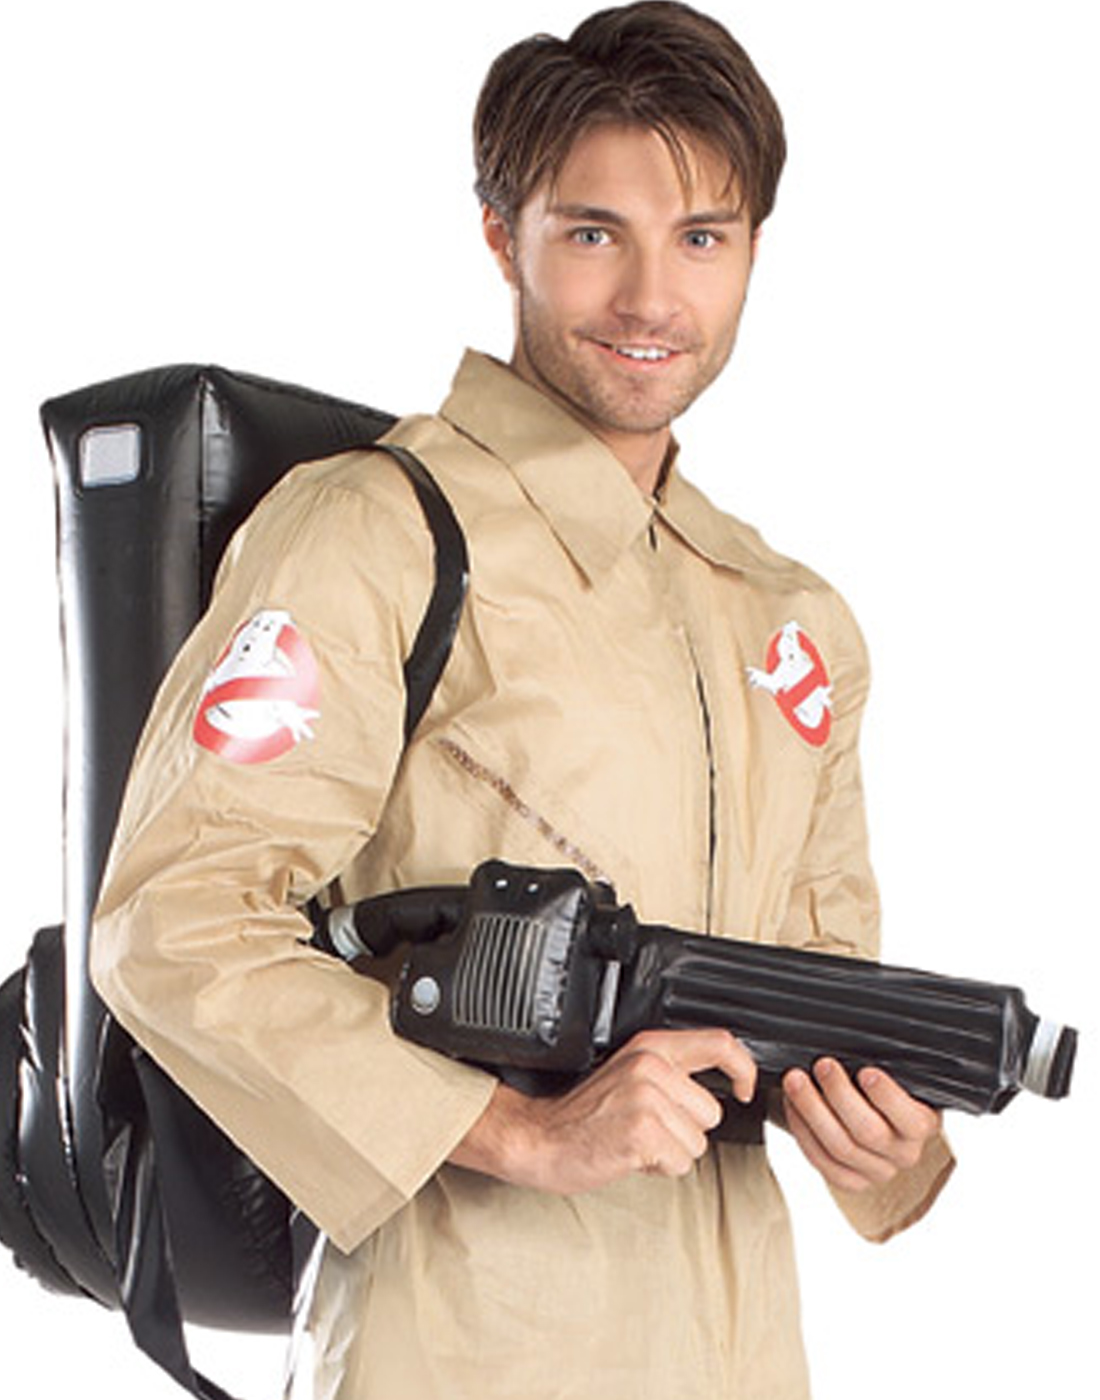 Rubie's Ghostbusters Peter Venkman Men's Halloween Fancy-Dress Costume for Adult, One Size - image 2 of 4